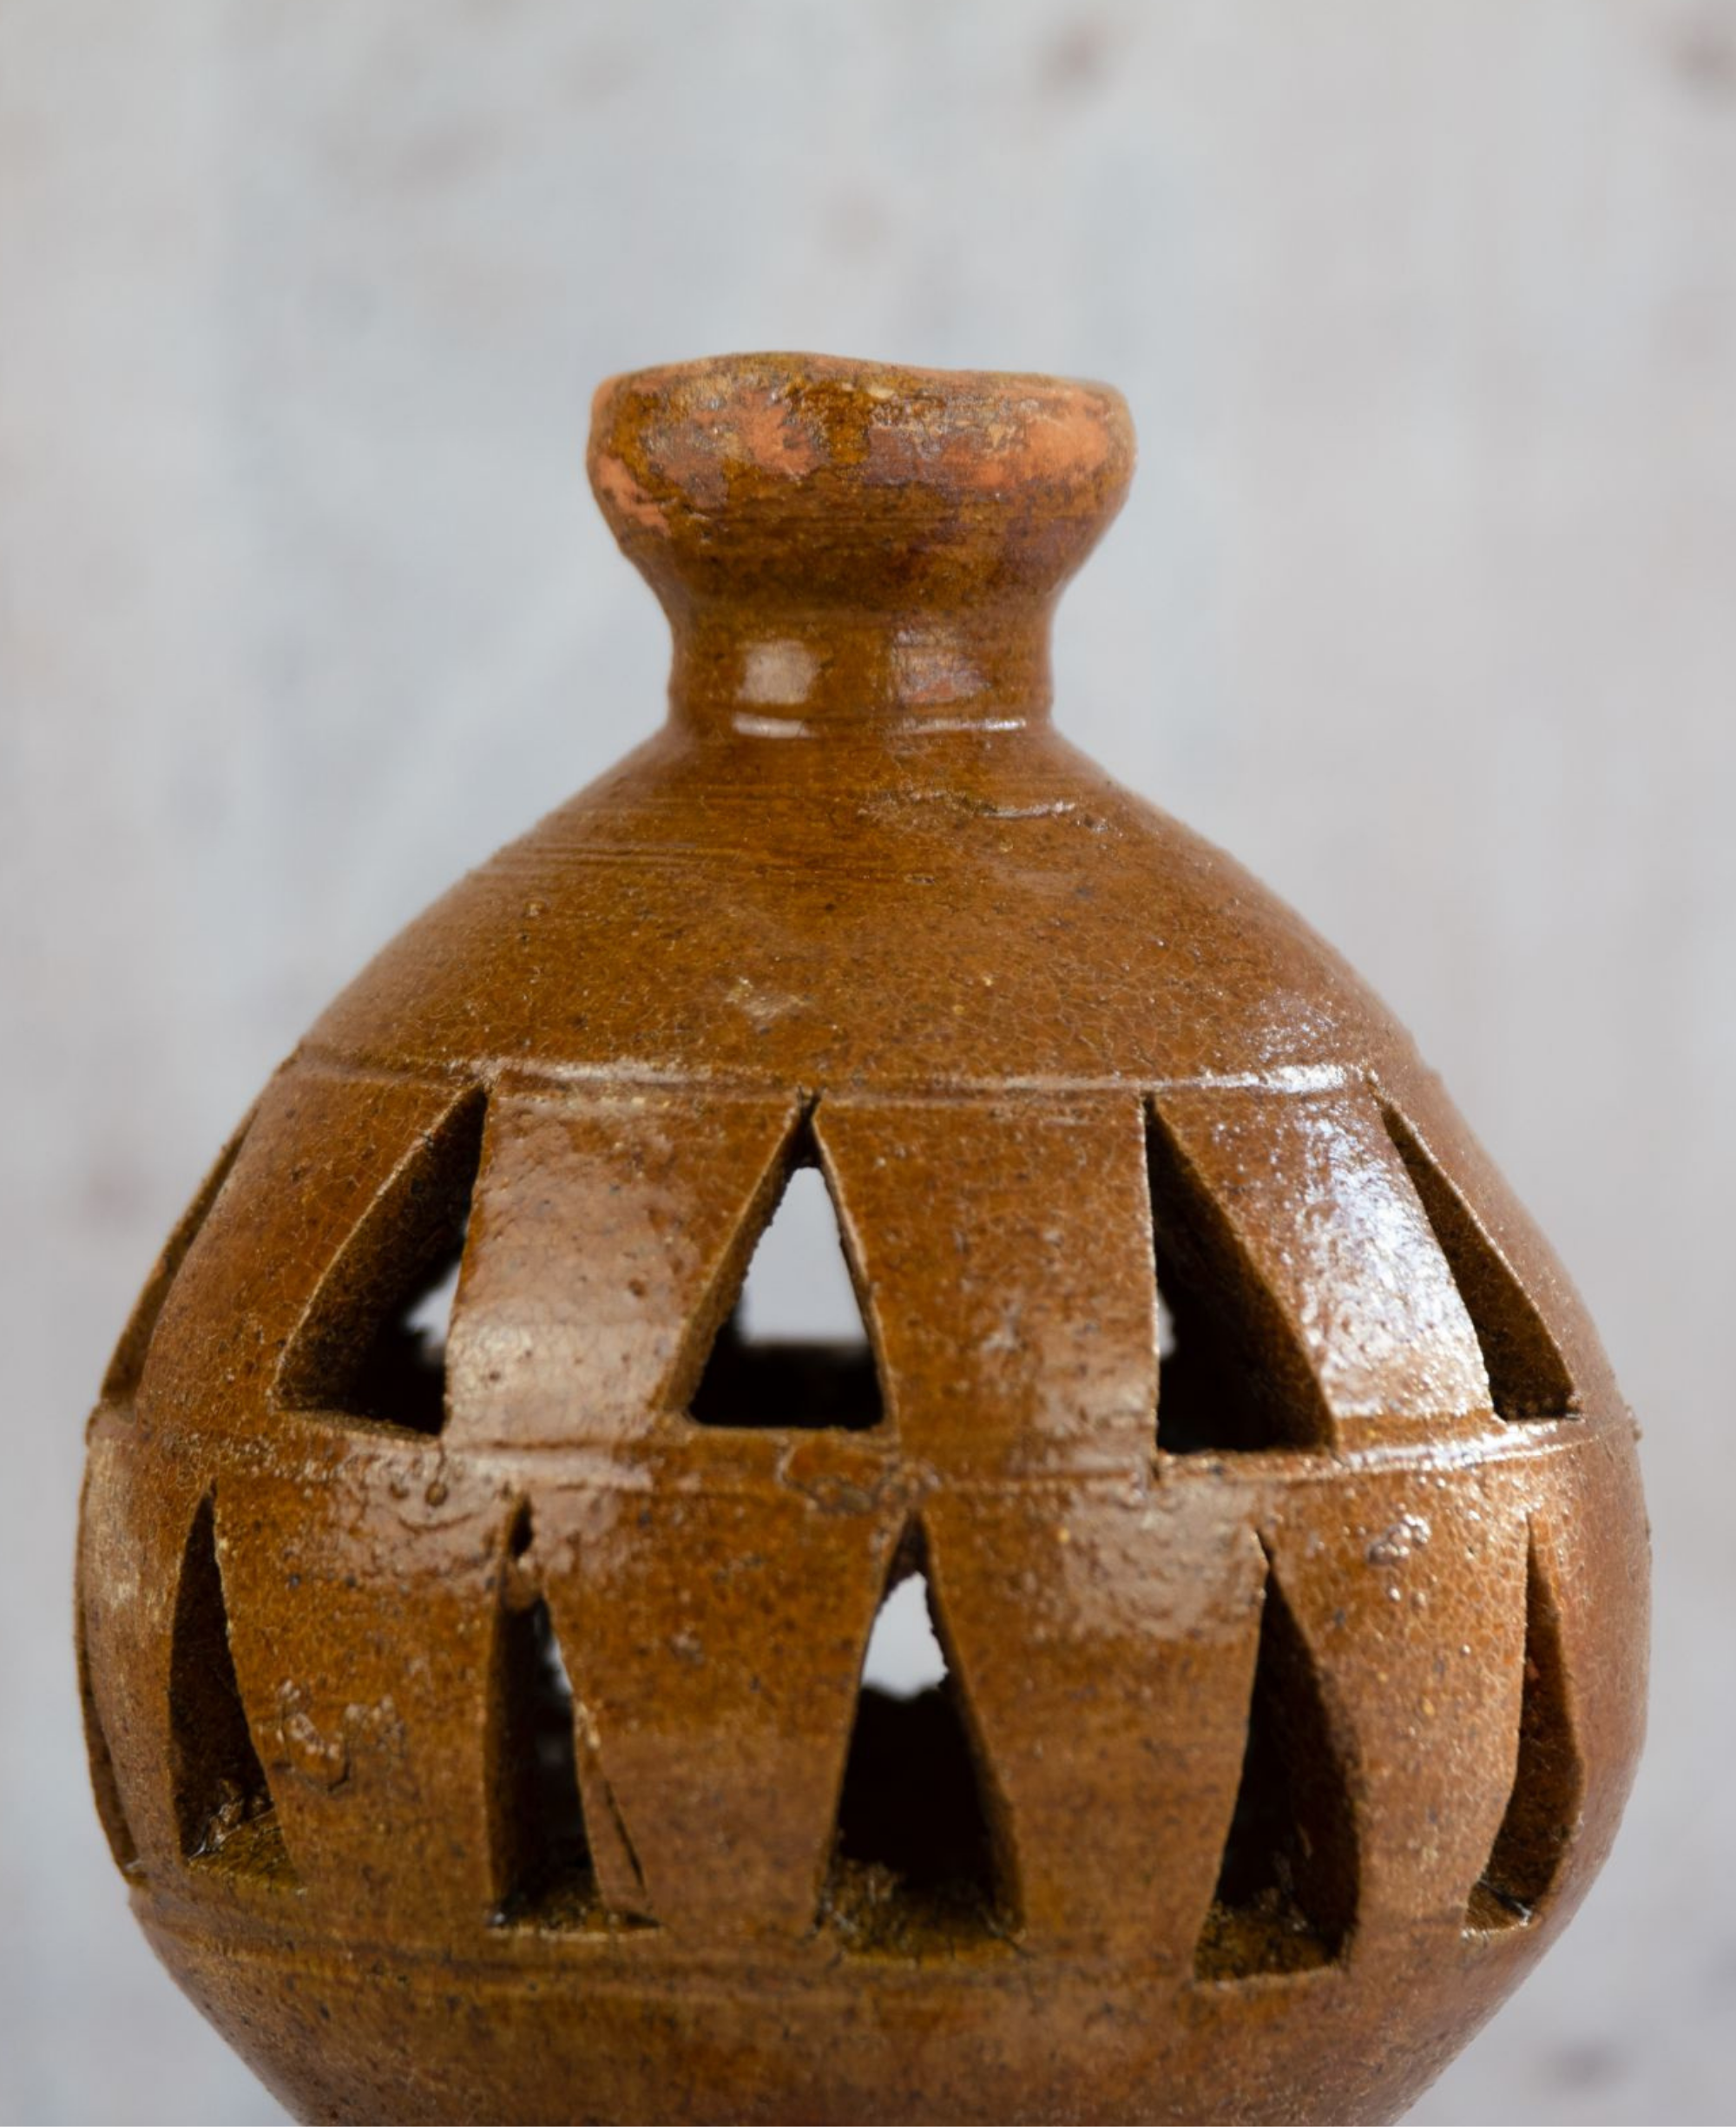 Illuminate Your Space with Our Handmade Moroccan Pottery Candle Holder- Exquisite Tea Light Holder Crafted in Morocco for a Touch of Artisan